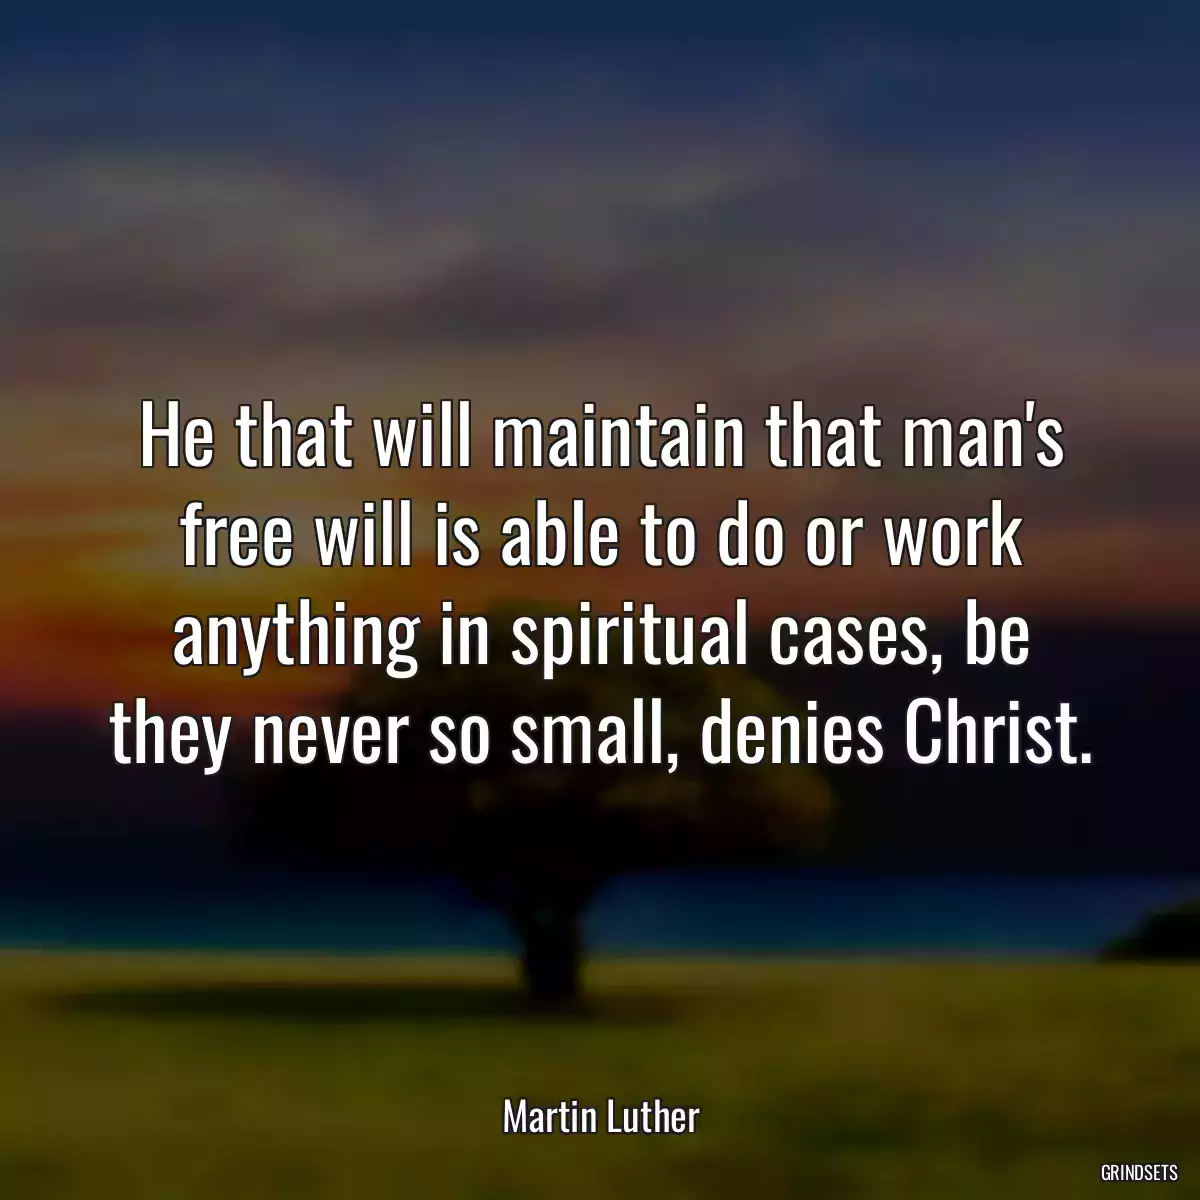 He that will maintain that man\'s free will is able to do or work anything in spiritual cases, be they never so small, denies Christ.